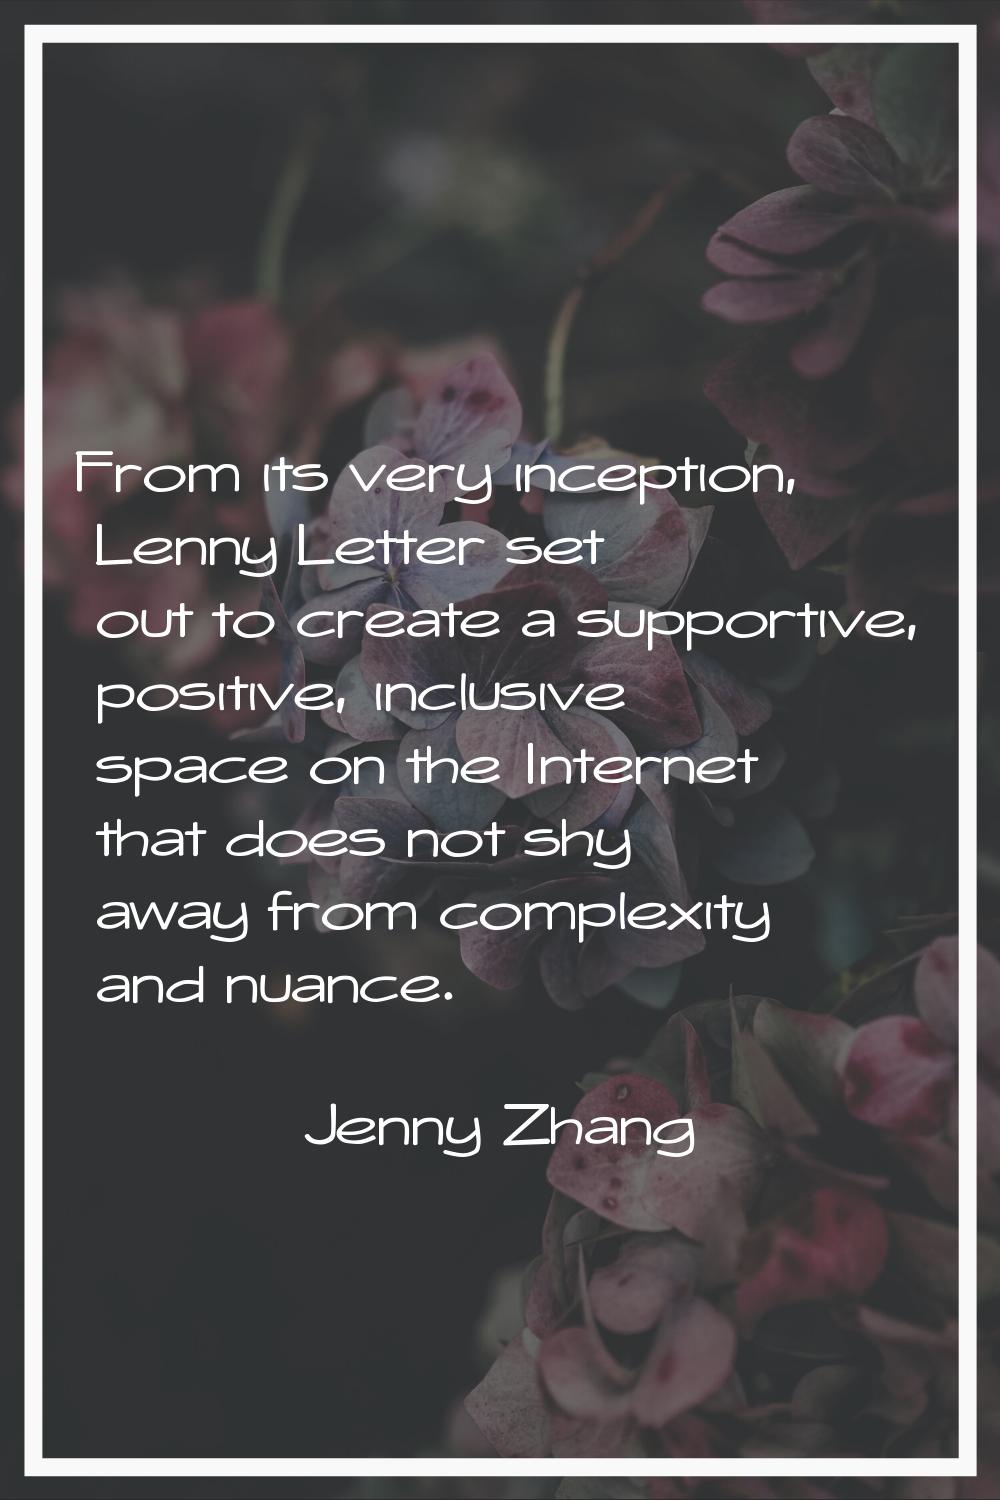 From its very inception, Lenny Letter set out to create a supportive, positive, inclusive space on 